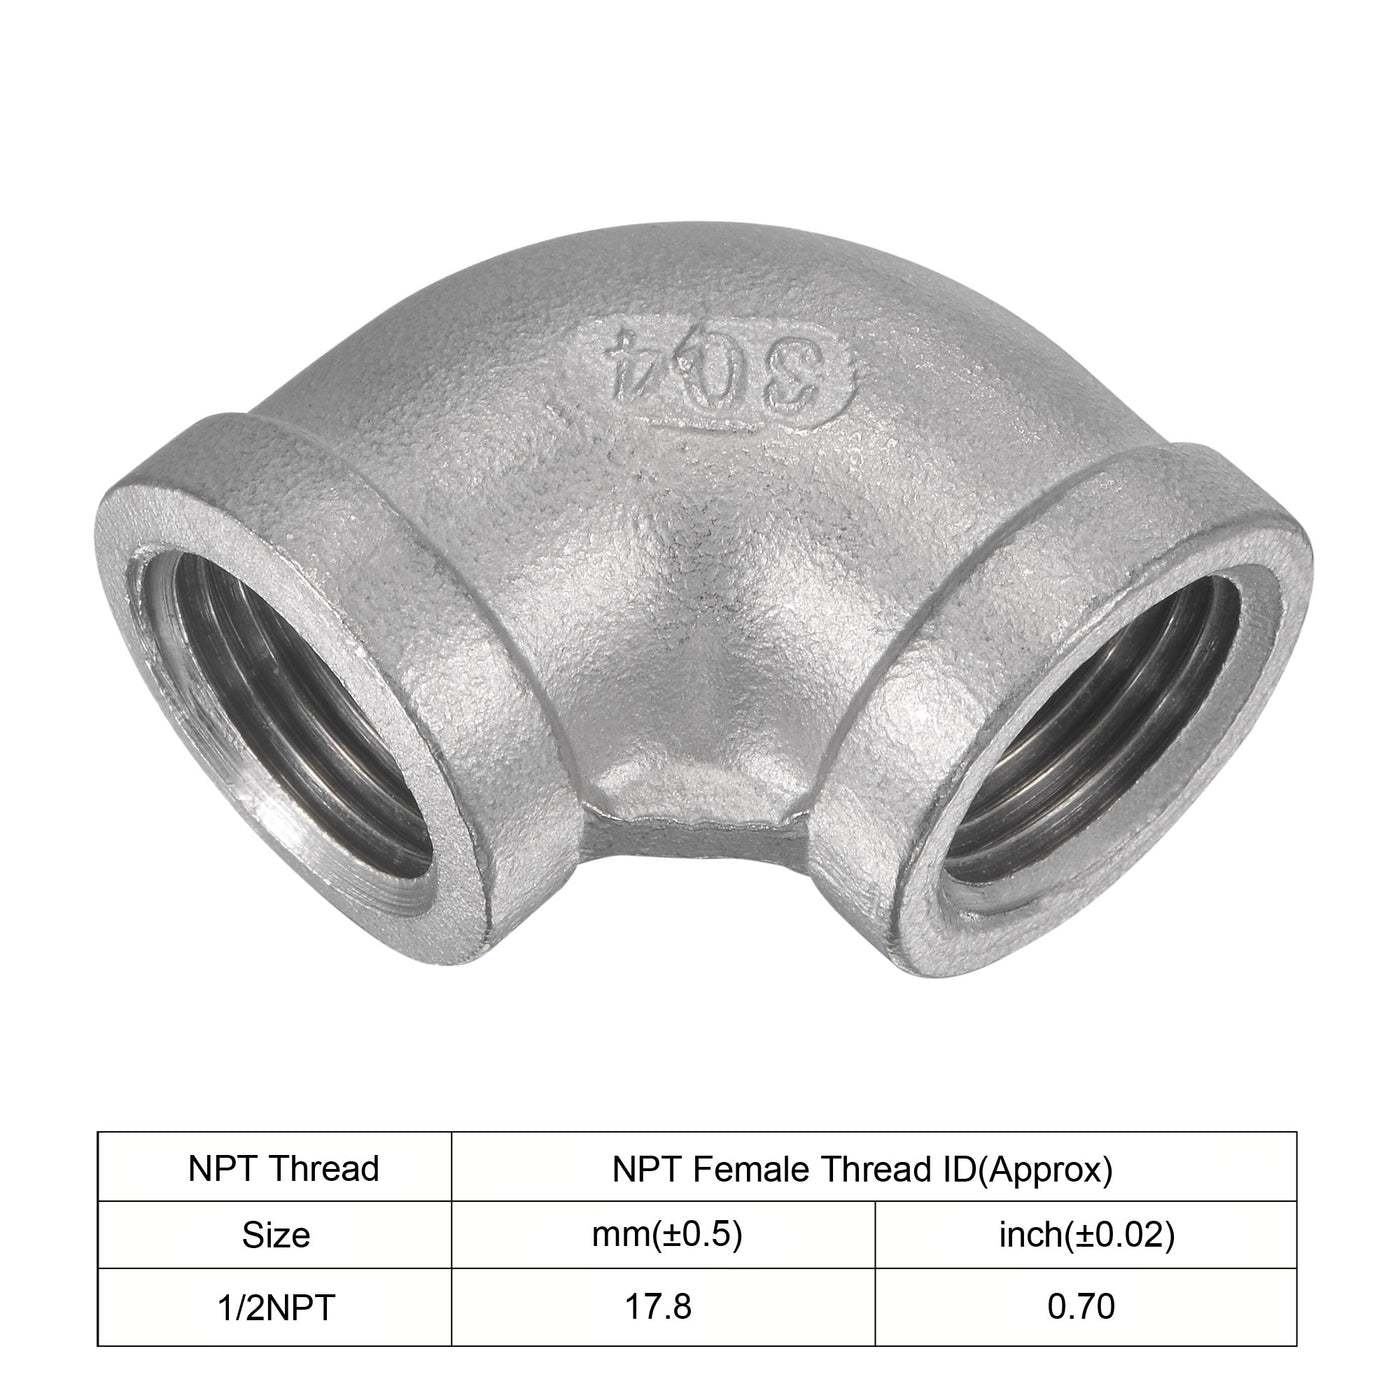 Uxcell Uxcell Pipe Fitting Elbow 3/4 NPT Female Thread Hose Connector Adapter, 304 Stainless Steel